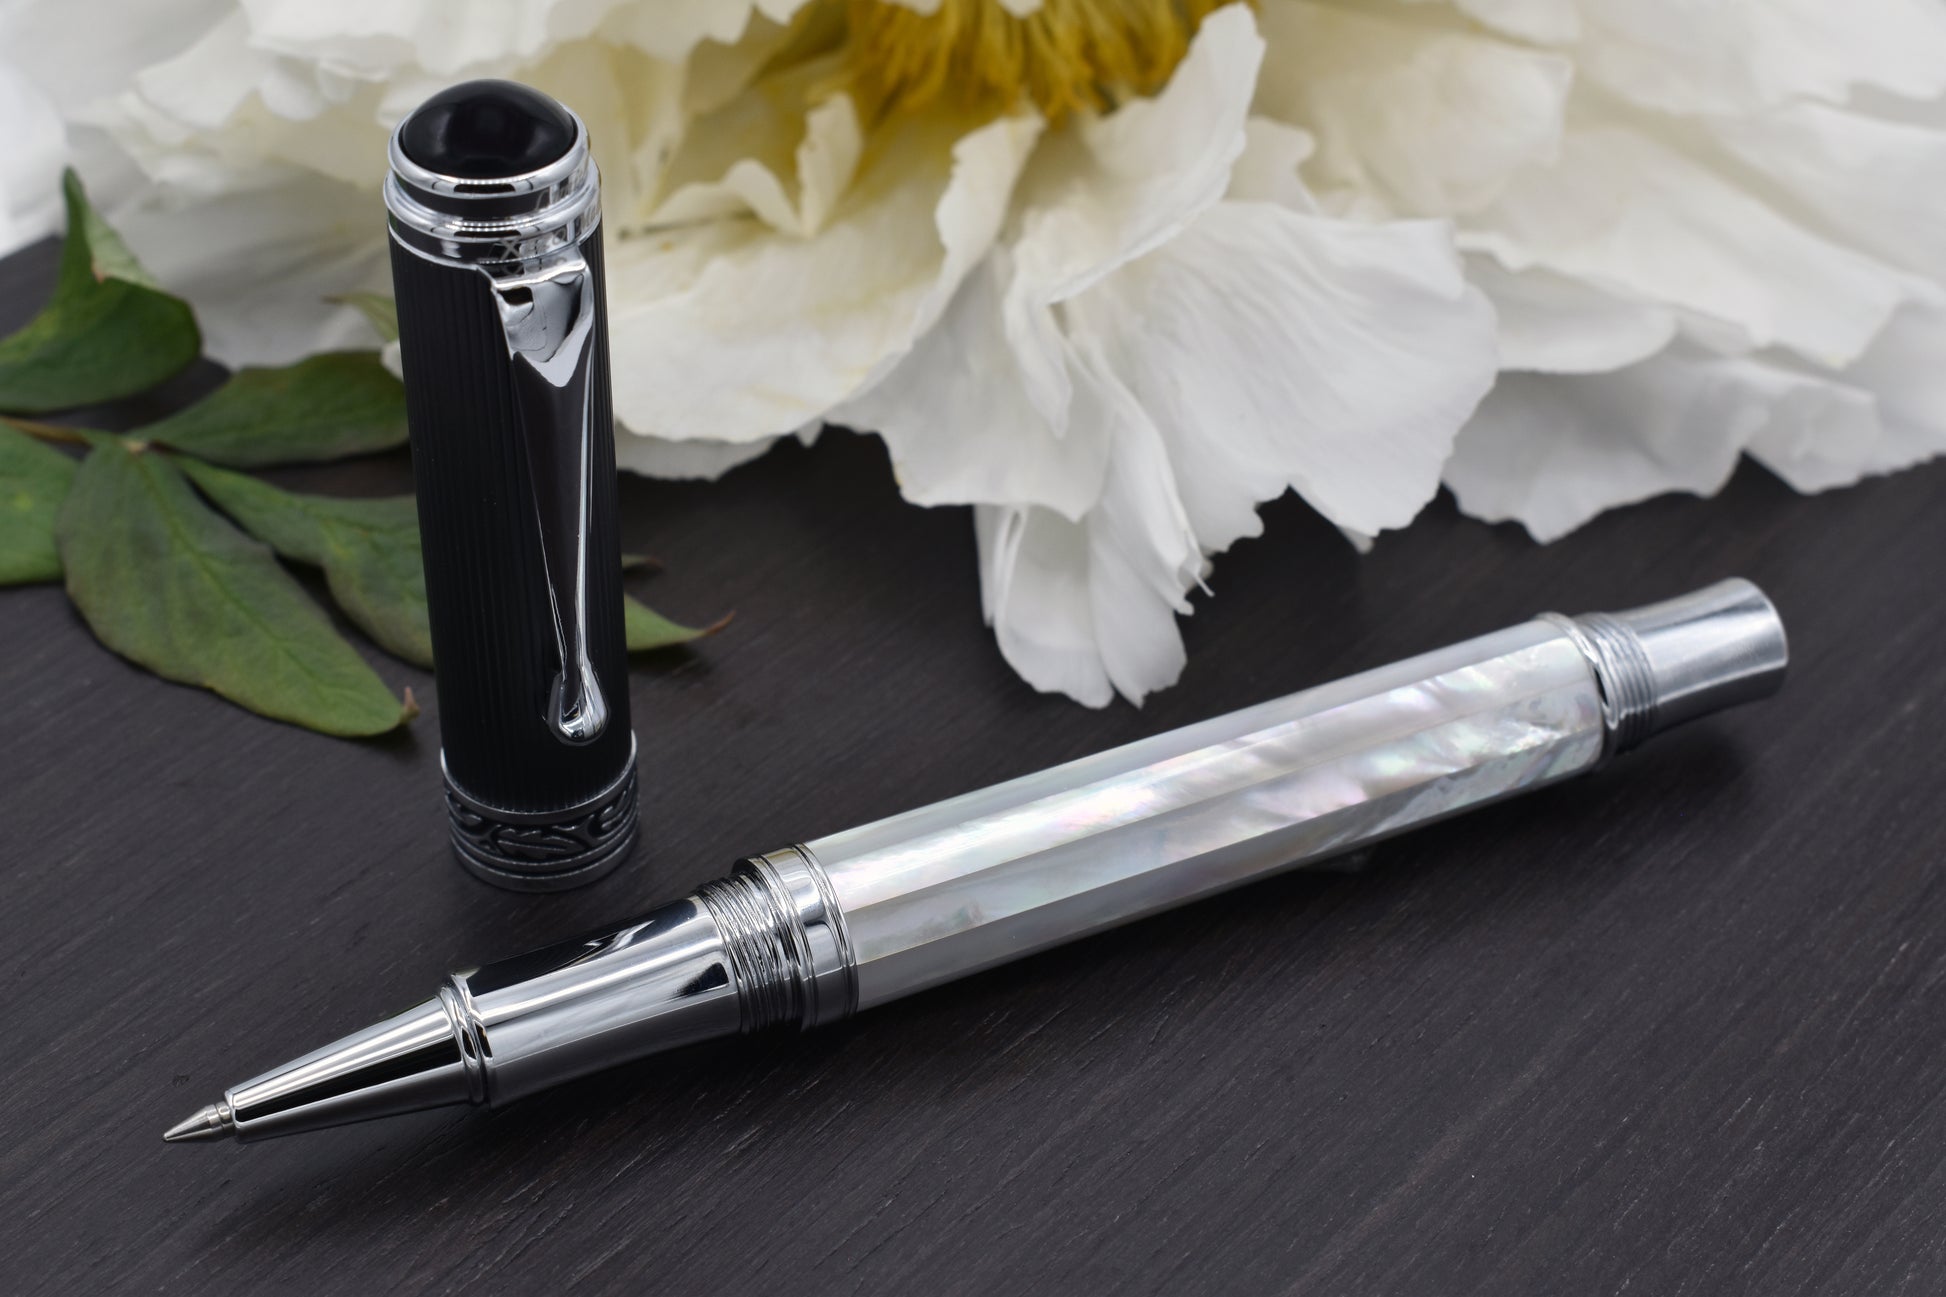 Maestro White MOP PVD R Rollerball pen with a peony flower